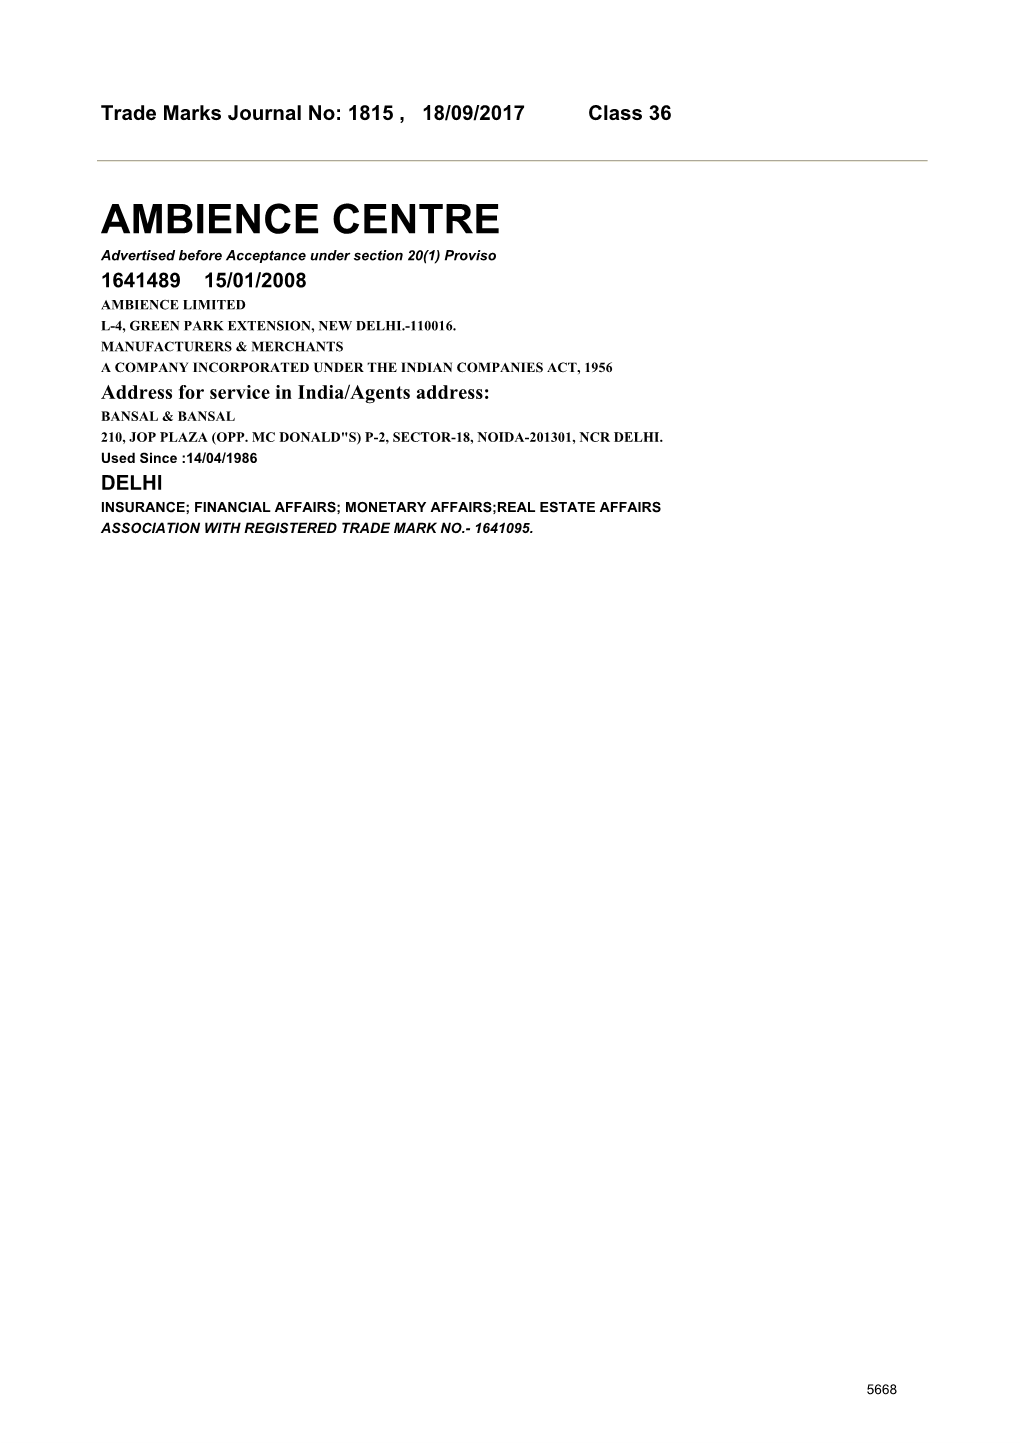 AMBIENCE CENTRE Advertised Before Acceptance Under Section 20(1) Proviso 1641489 15/01/2008 AMBIENCE LIMITED L-4, GREEN PARK EXTENSION, NEW DELHI.-110016